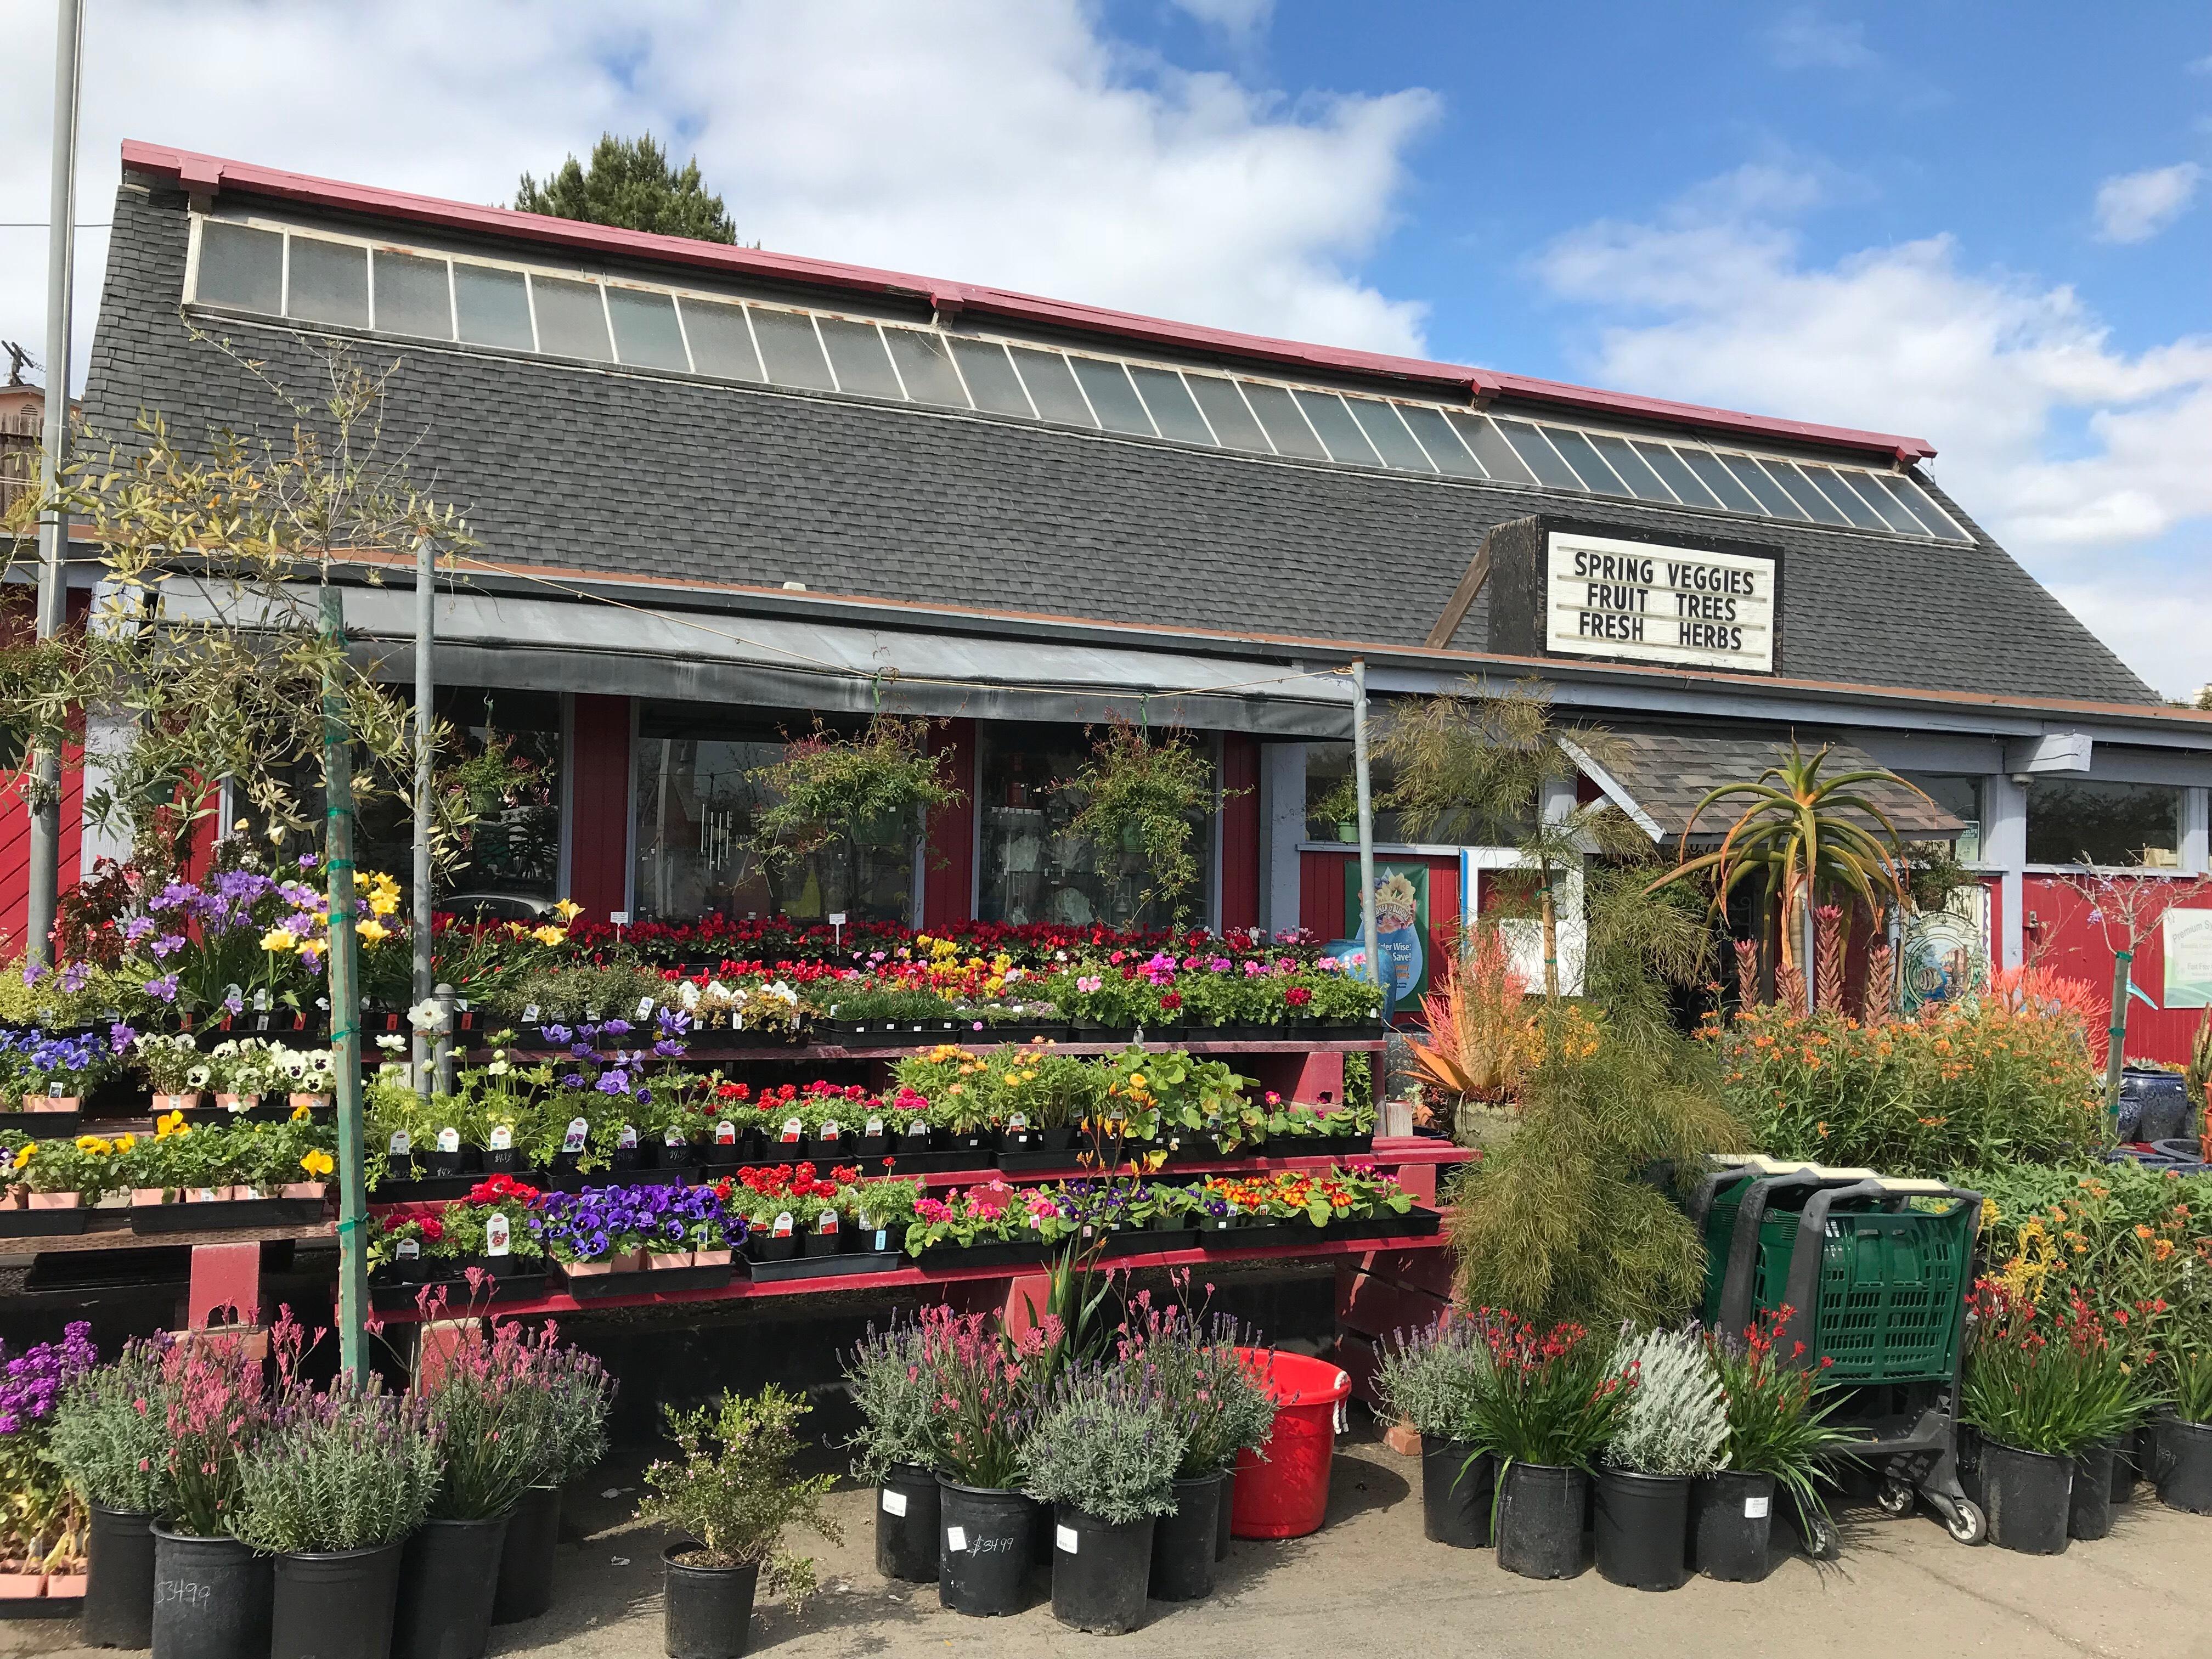 Browse our garden center and speak to our experts.